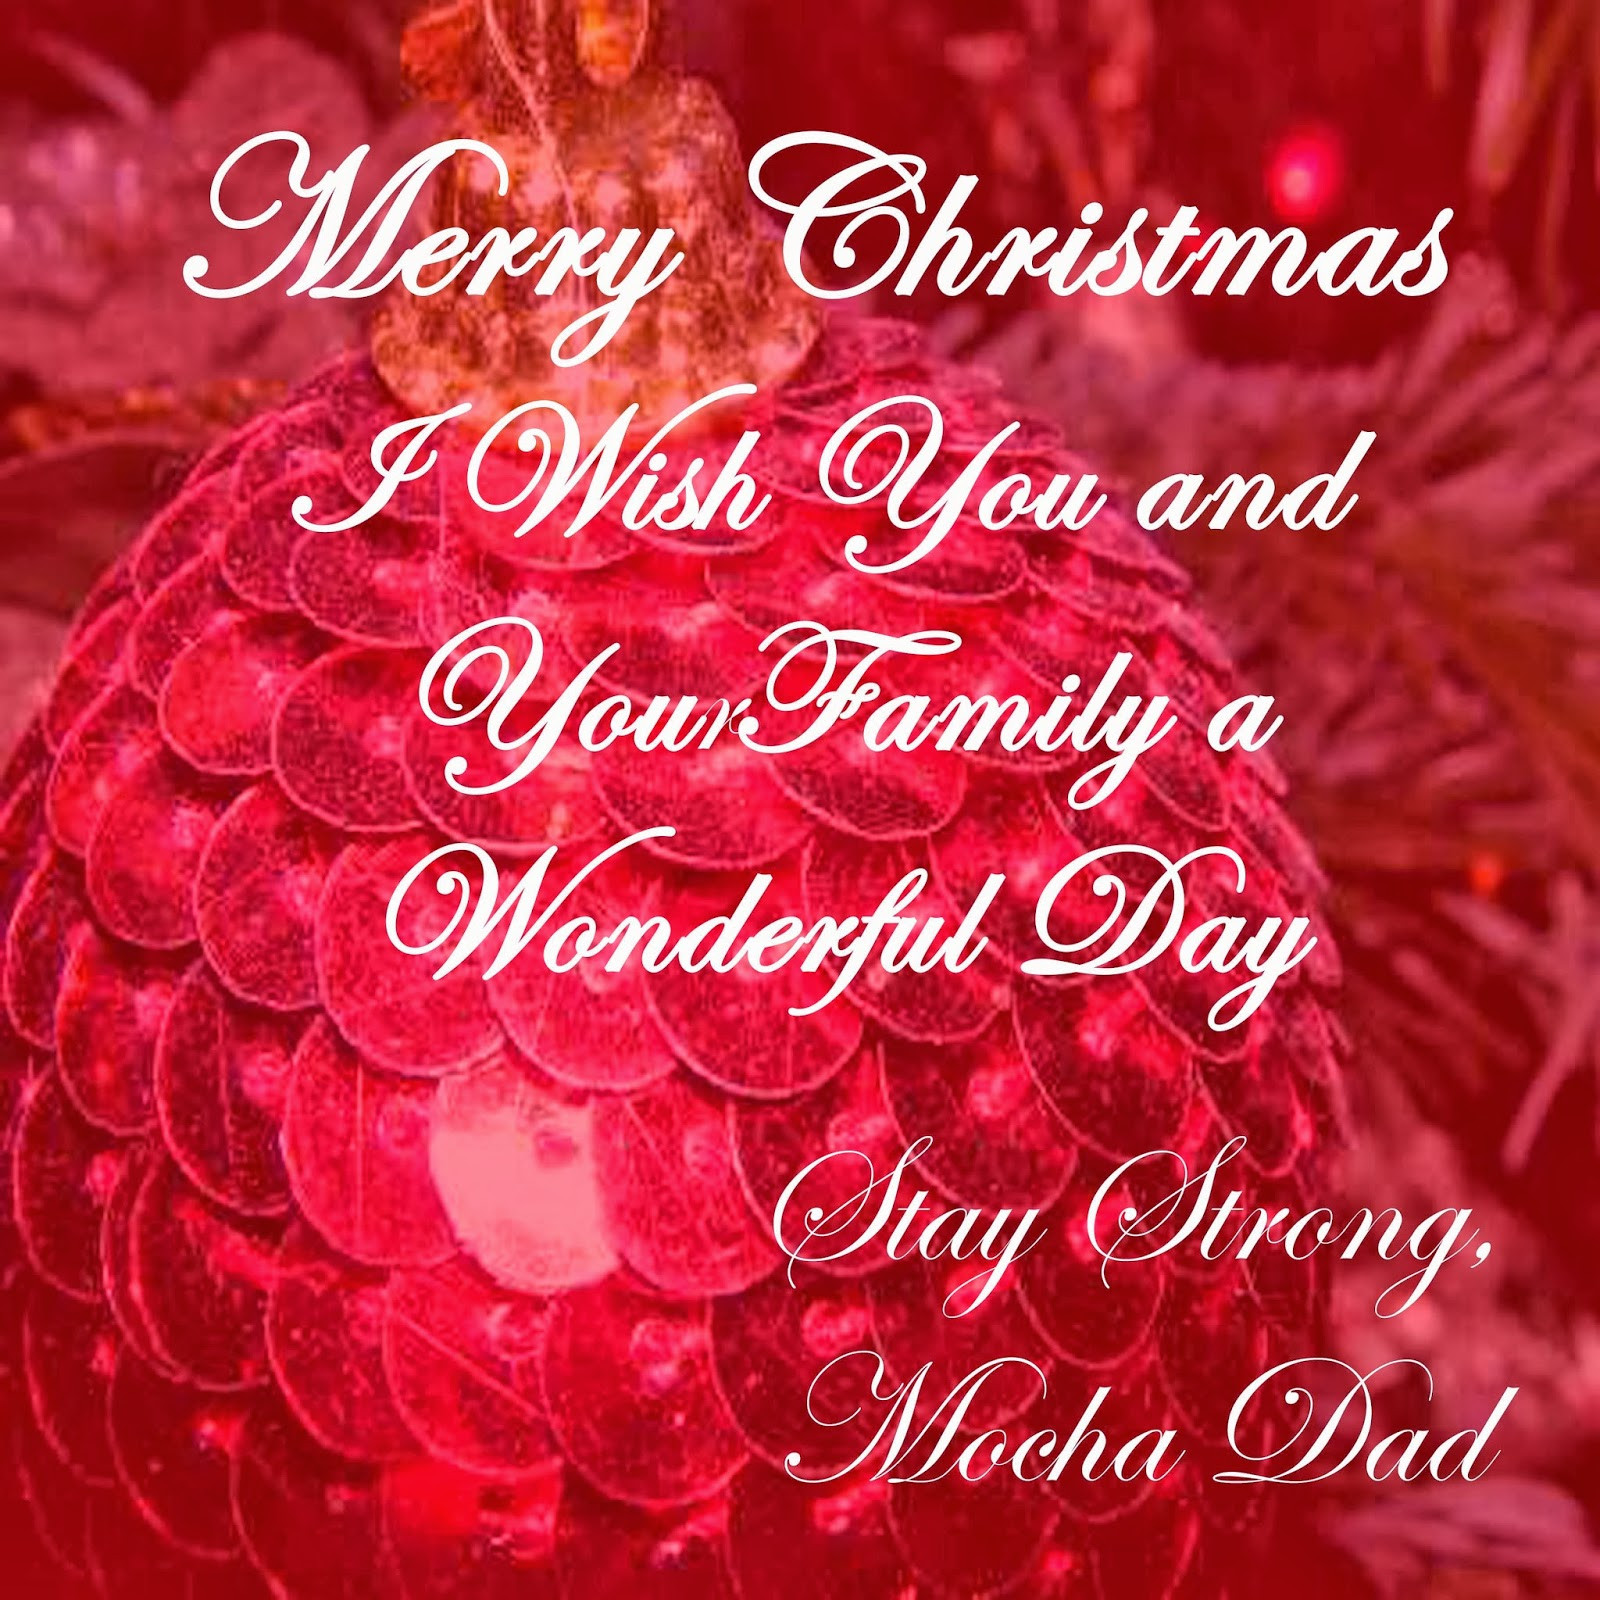 Christmas Pictures And Quotes
 Top 20 Merry Christmas